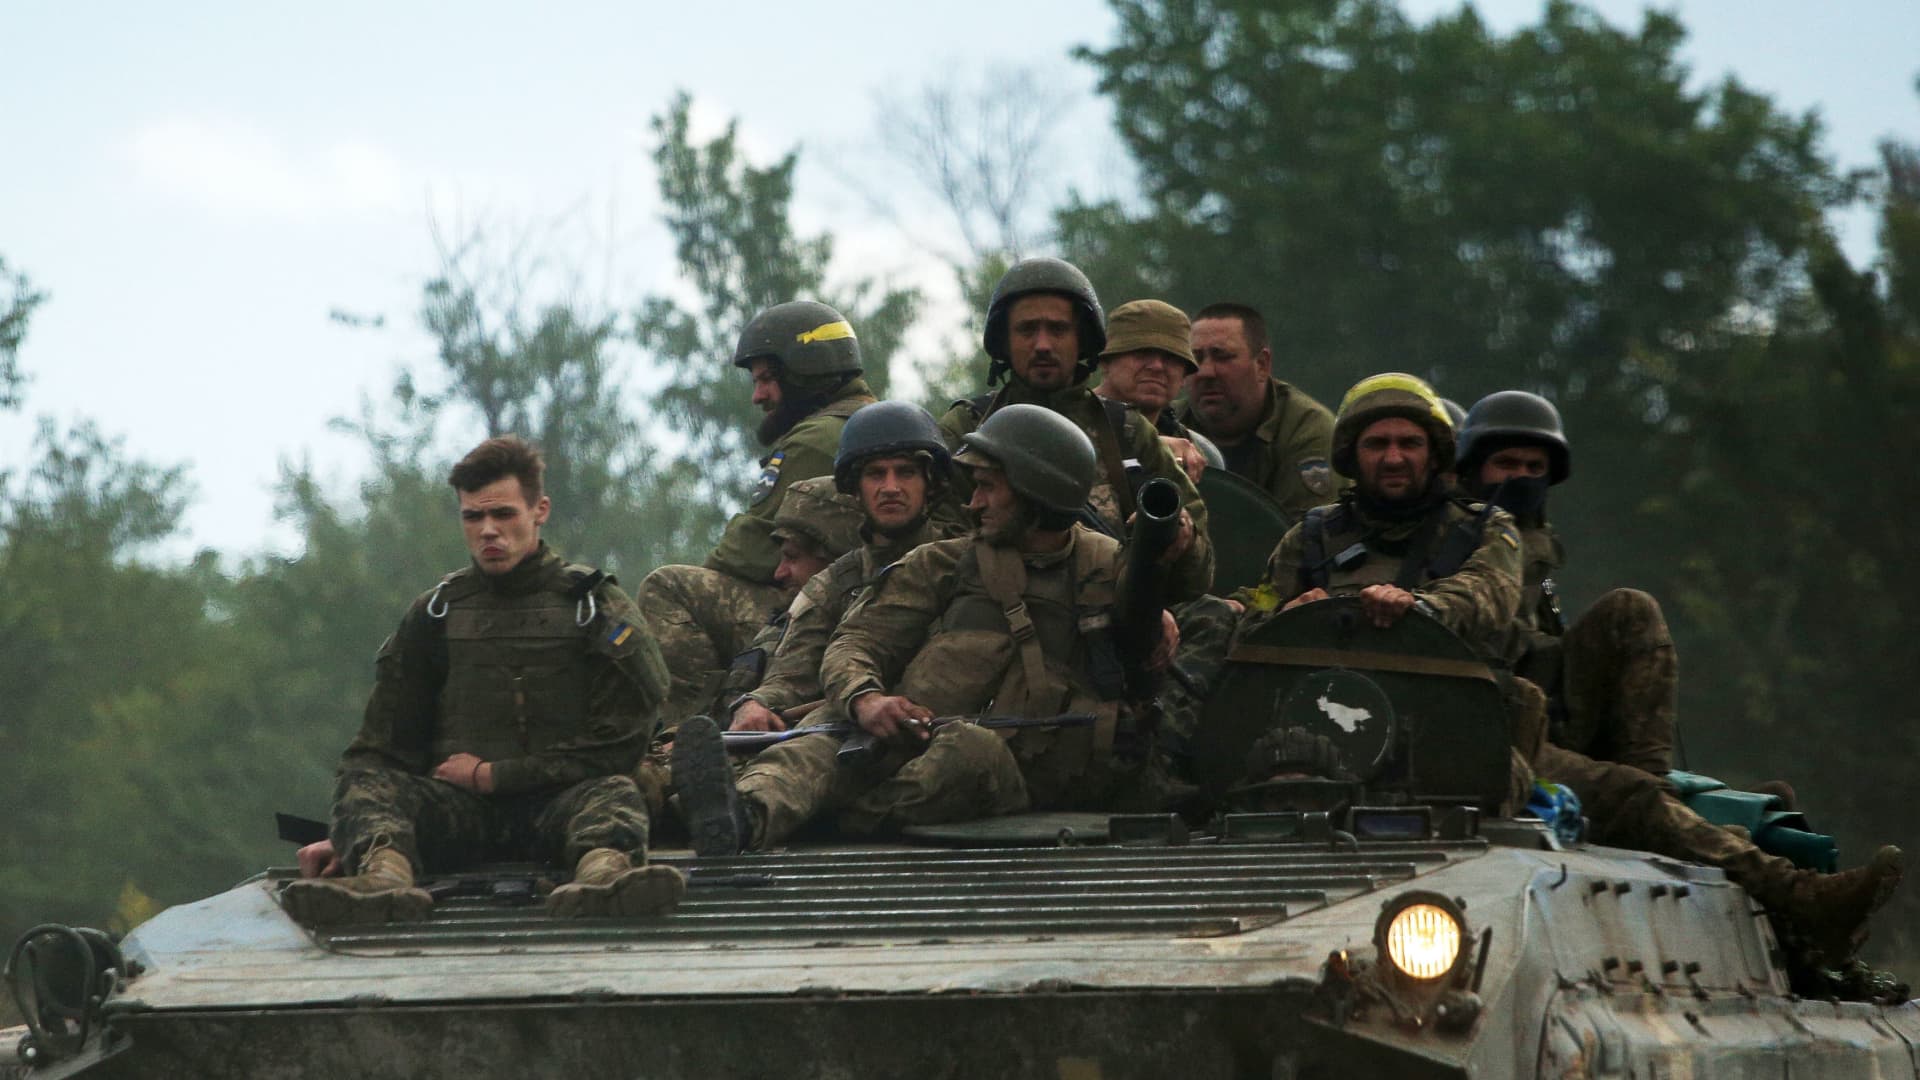 Ukrainian soldiers ride on an armored personnel carrier in the Luhansk region on June 23, 2022. Luhansk is currently the site of the fiercest fighting between Russia and Ukraine.